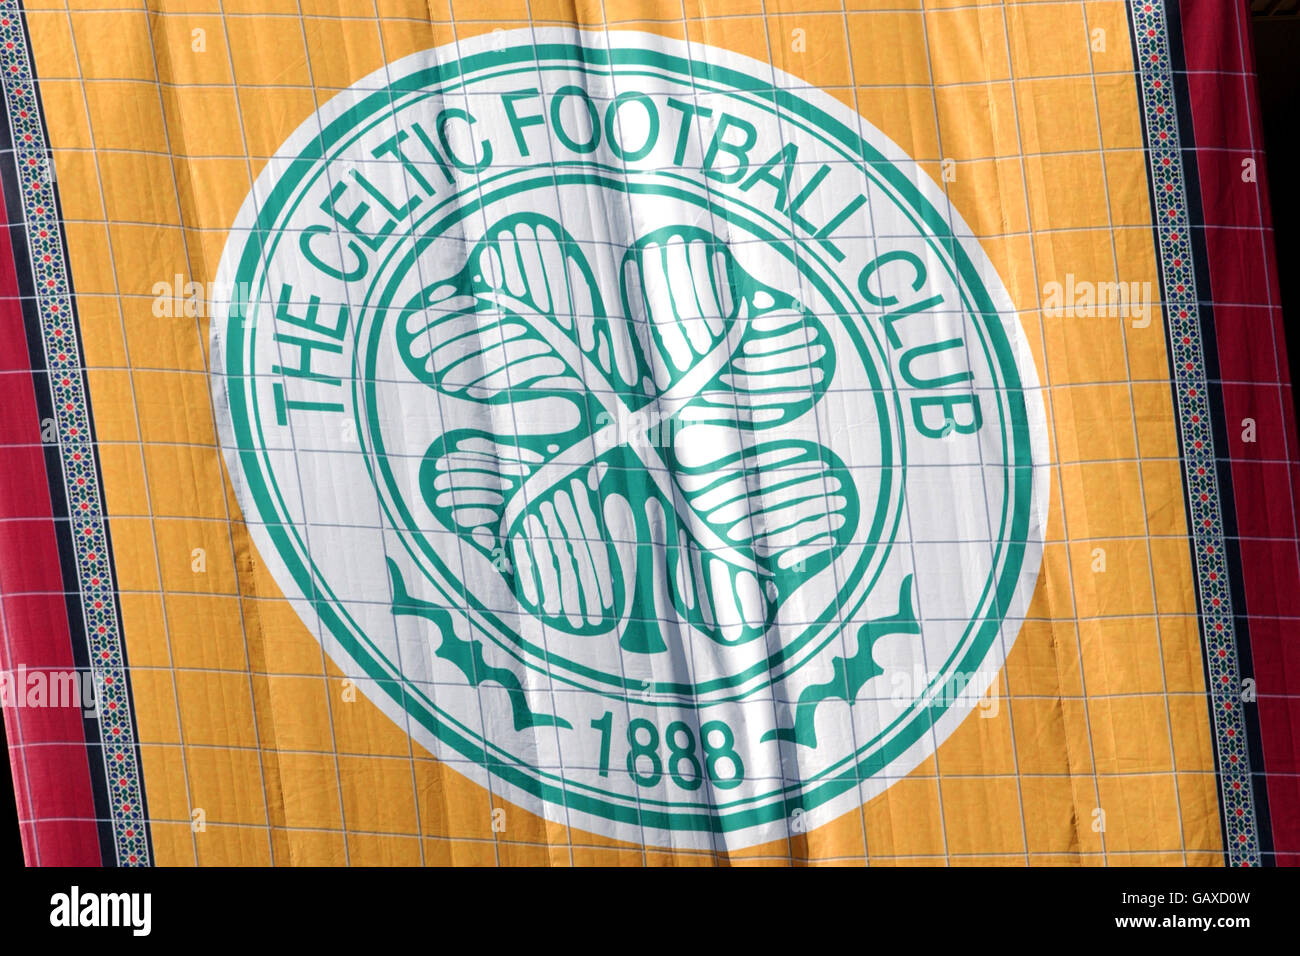 Celtic football club shop hi-res stock photography and images - Alamy